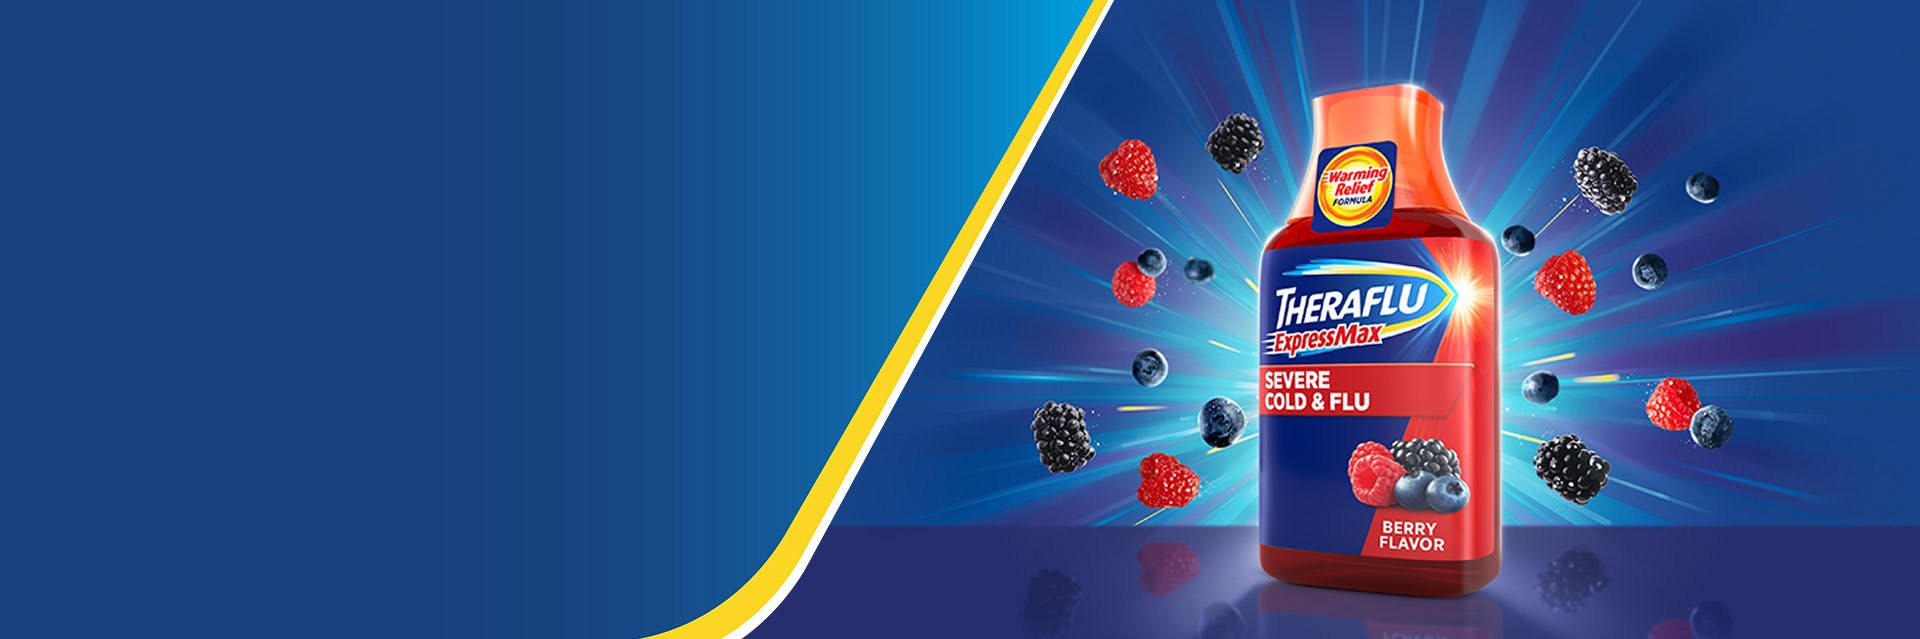 Bottle of Theraflu syrup and berries on blue background